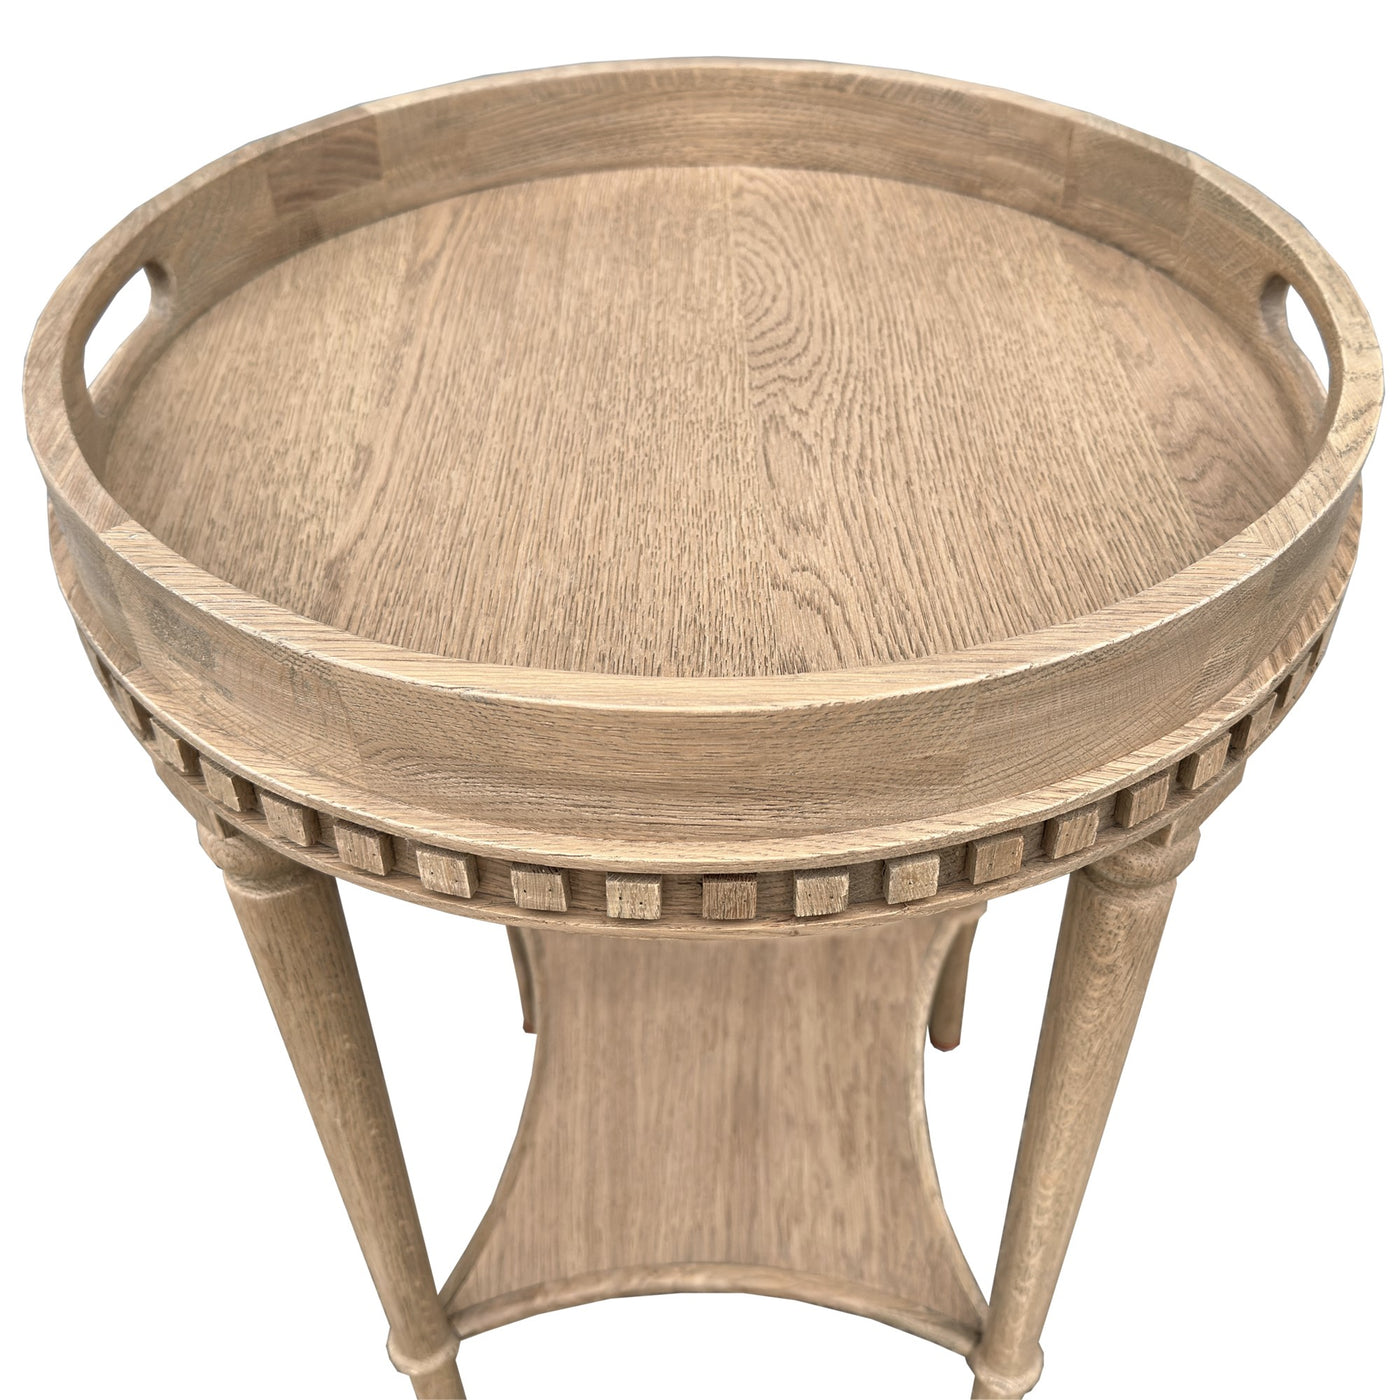 Cardin Round Side Table Weathered Oak